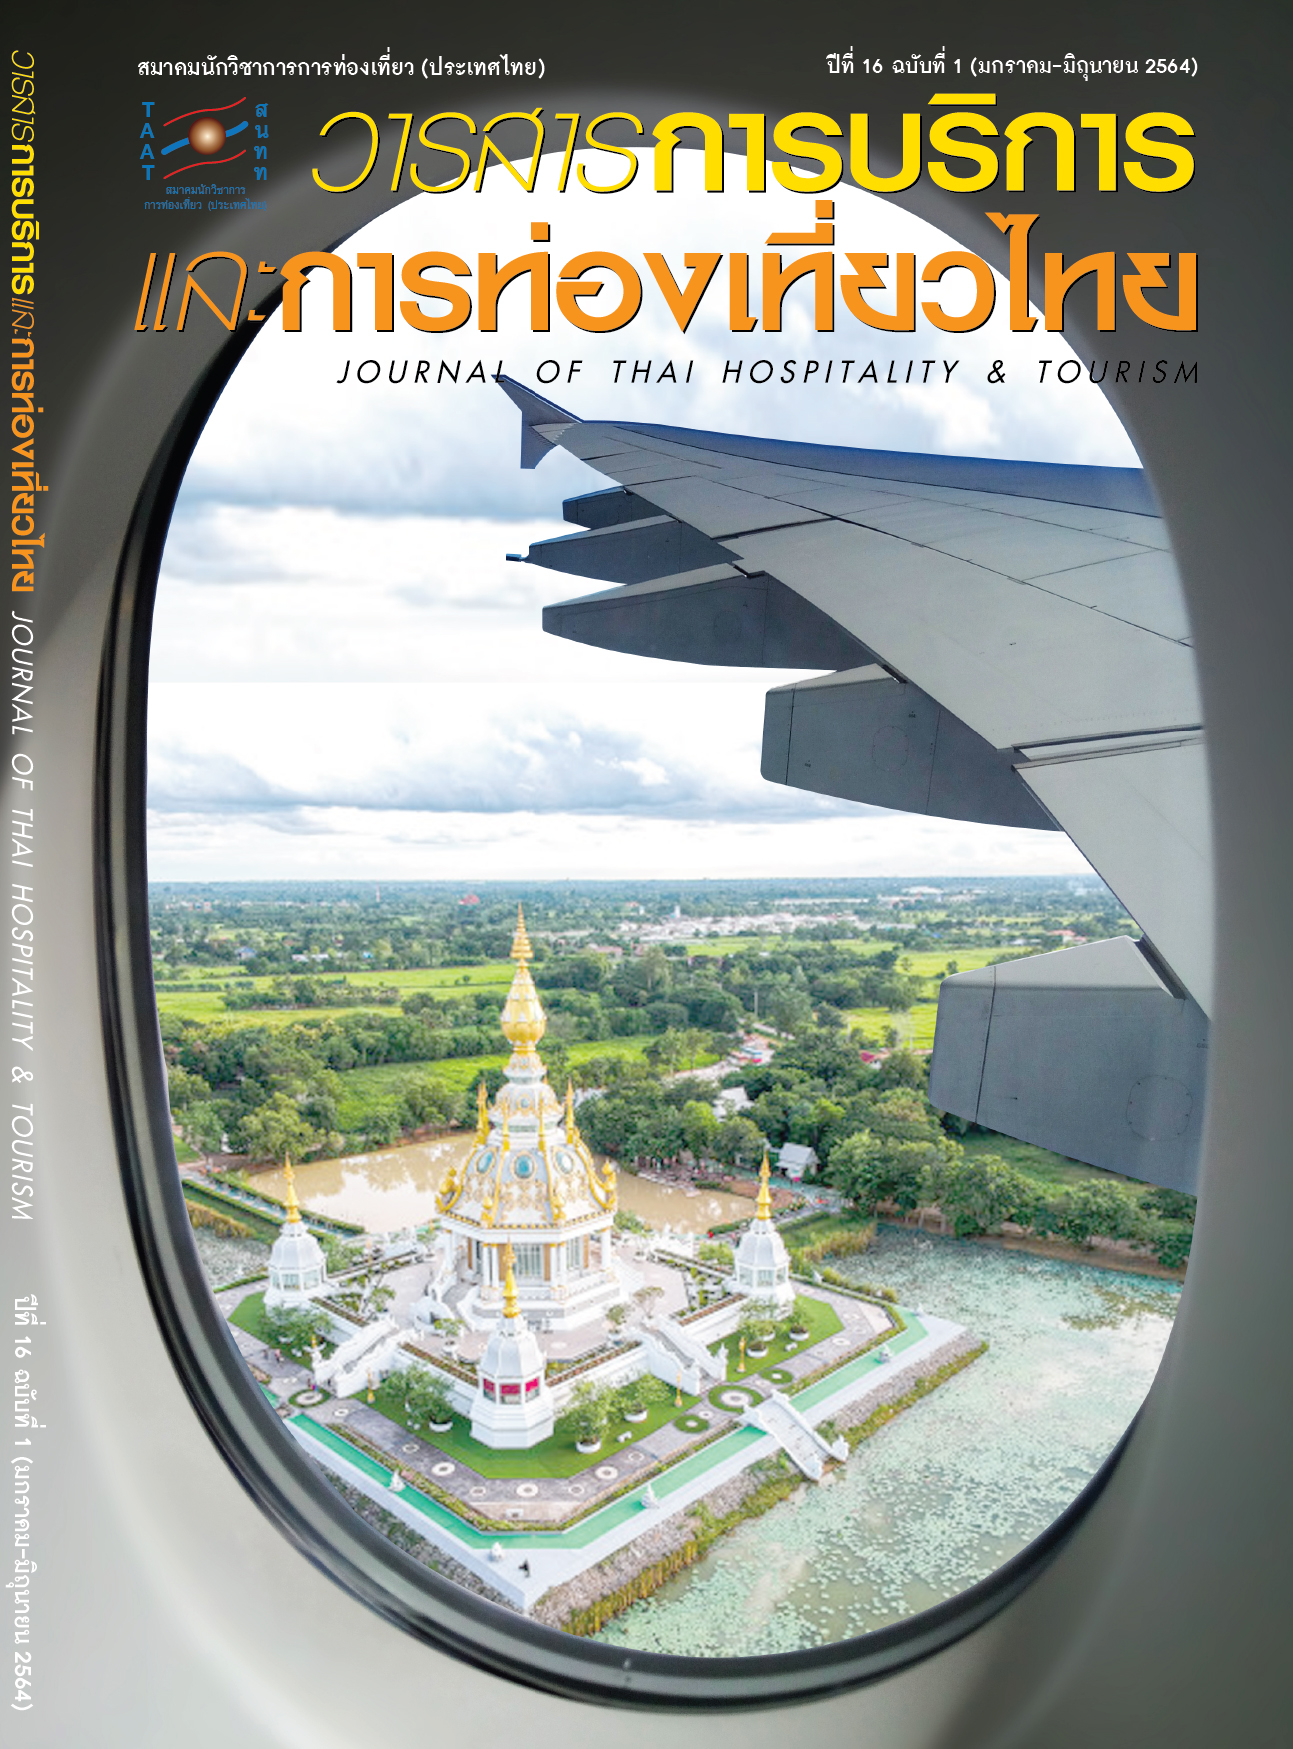 thailand tourism case study geography